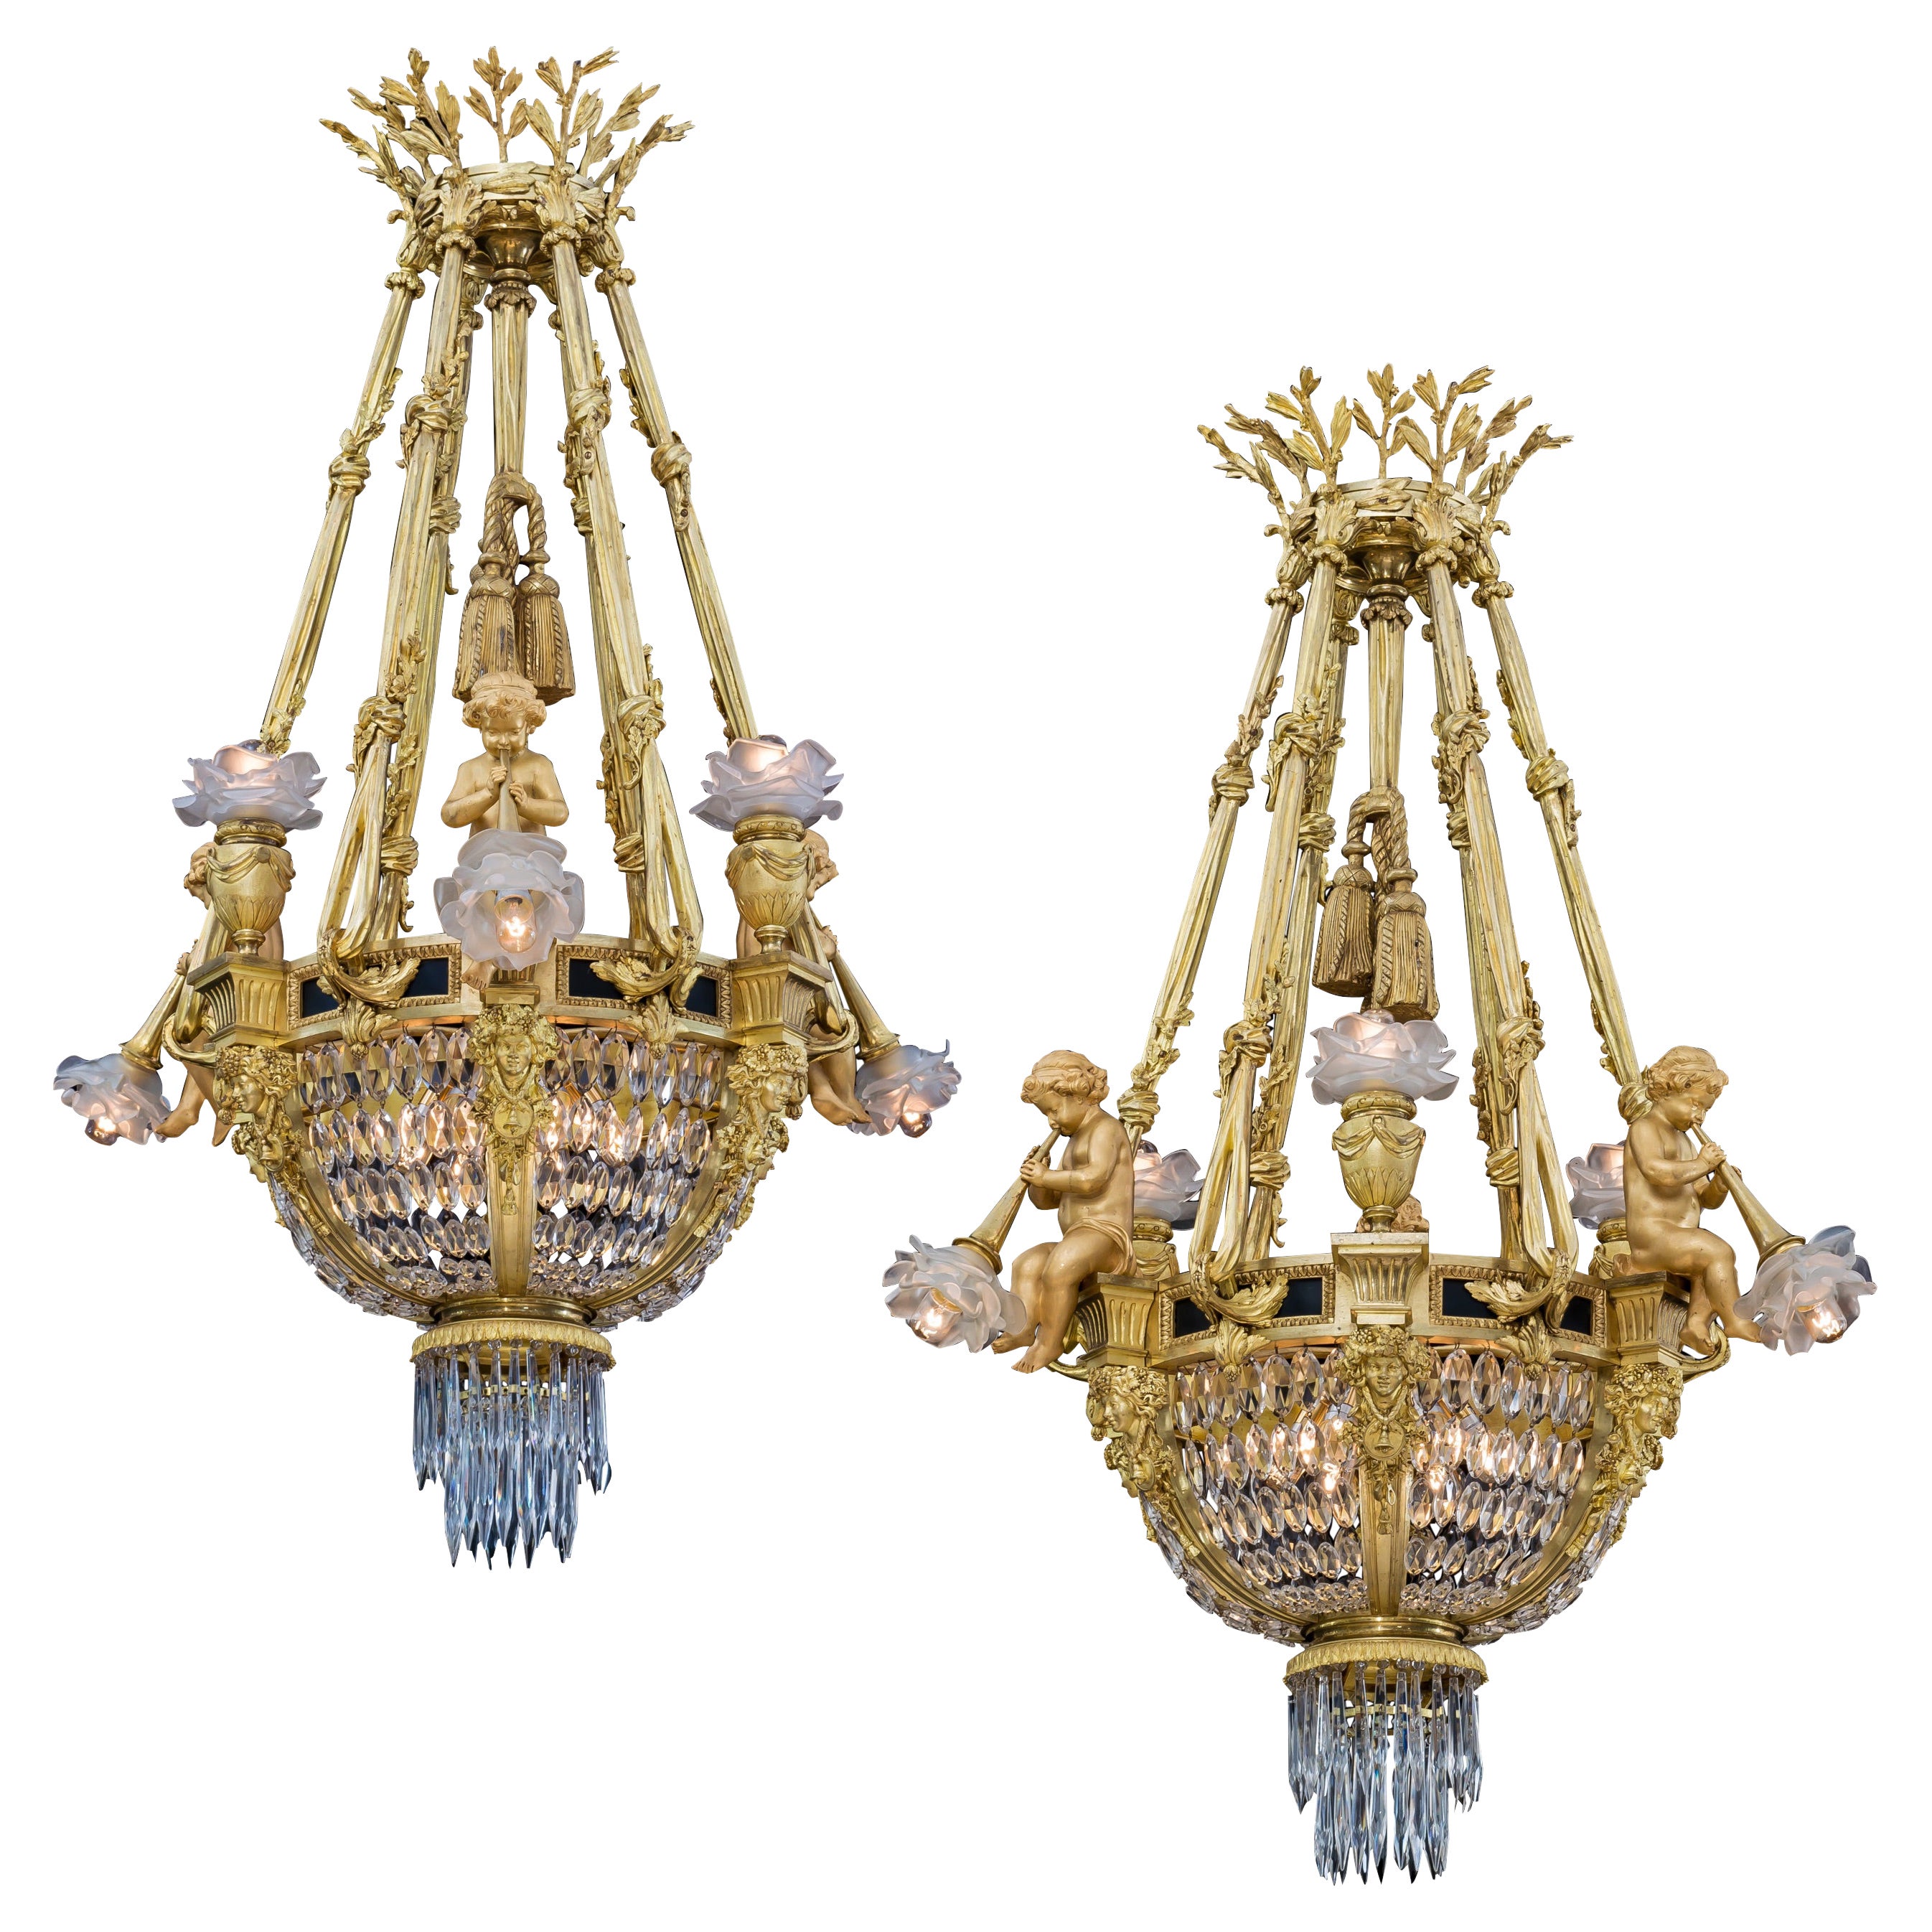 Extremely Rare Pair of Ormolu and Crystal Chandeliers in the Louis XVI Style